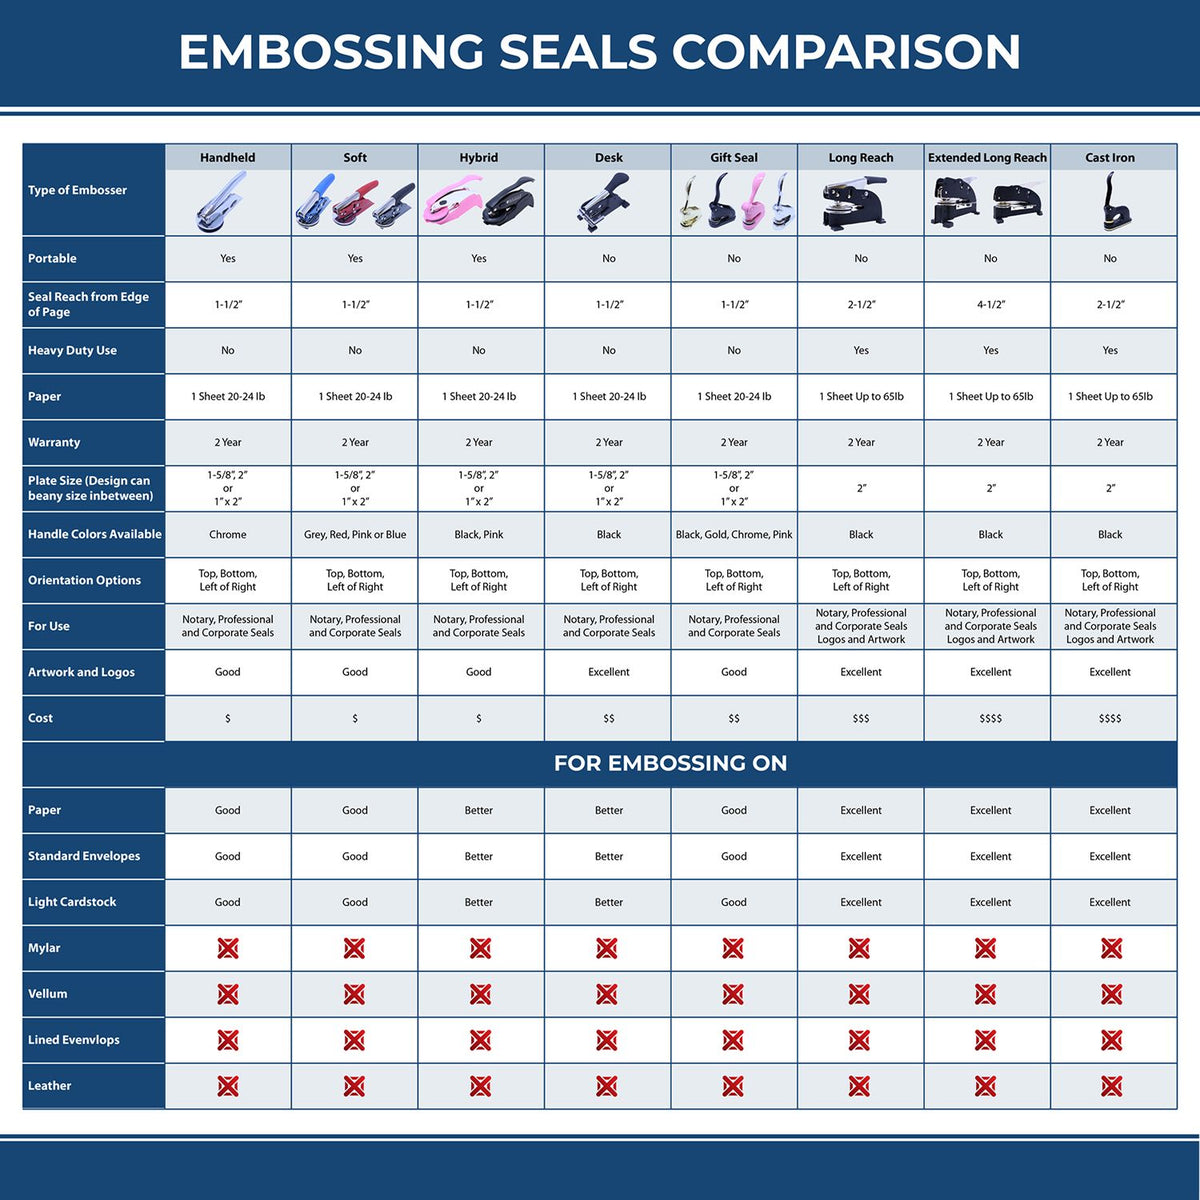 A comparison chart for the different types of mount models available for the Handheld Oregon Professional Geologist Embosser